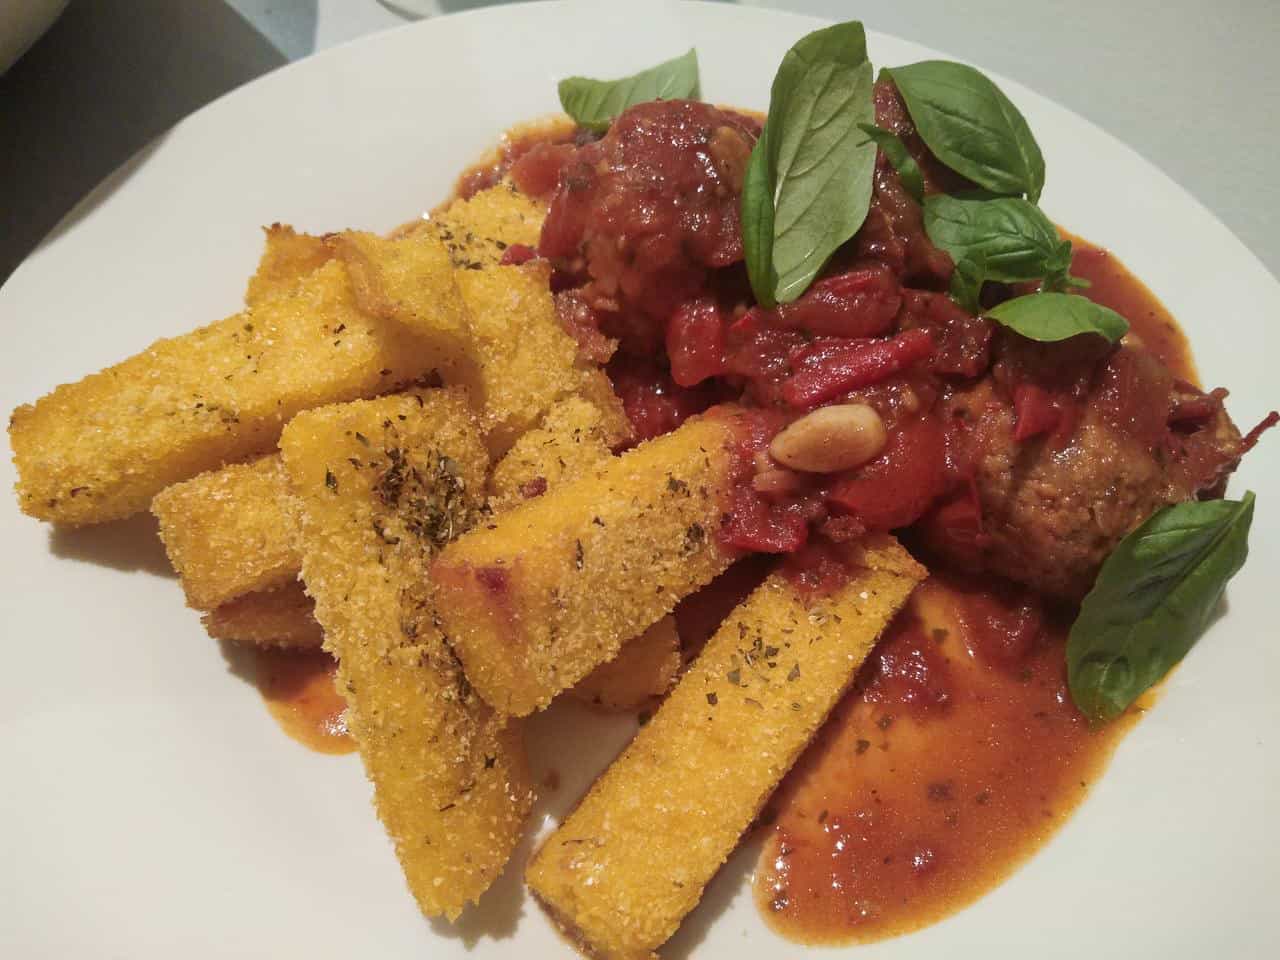 Reduce your food's carbon footprint by eating more vegetarian meals // My plant-based meatballs with polenta chips // travelmermaid.com